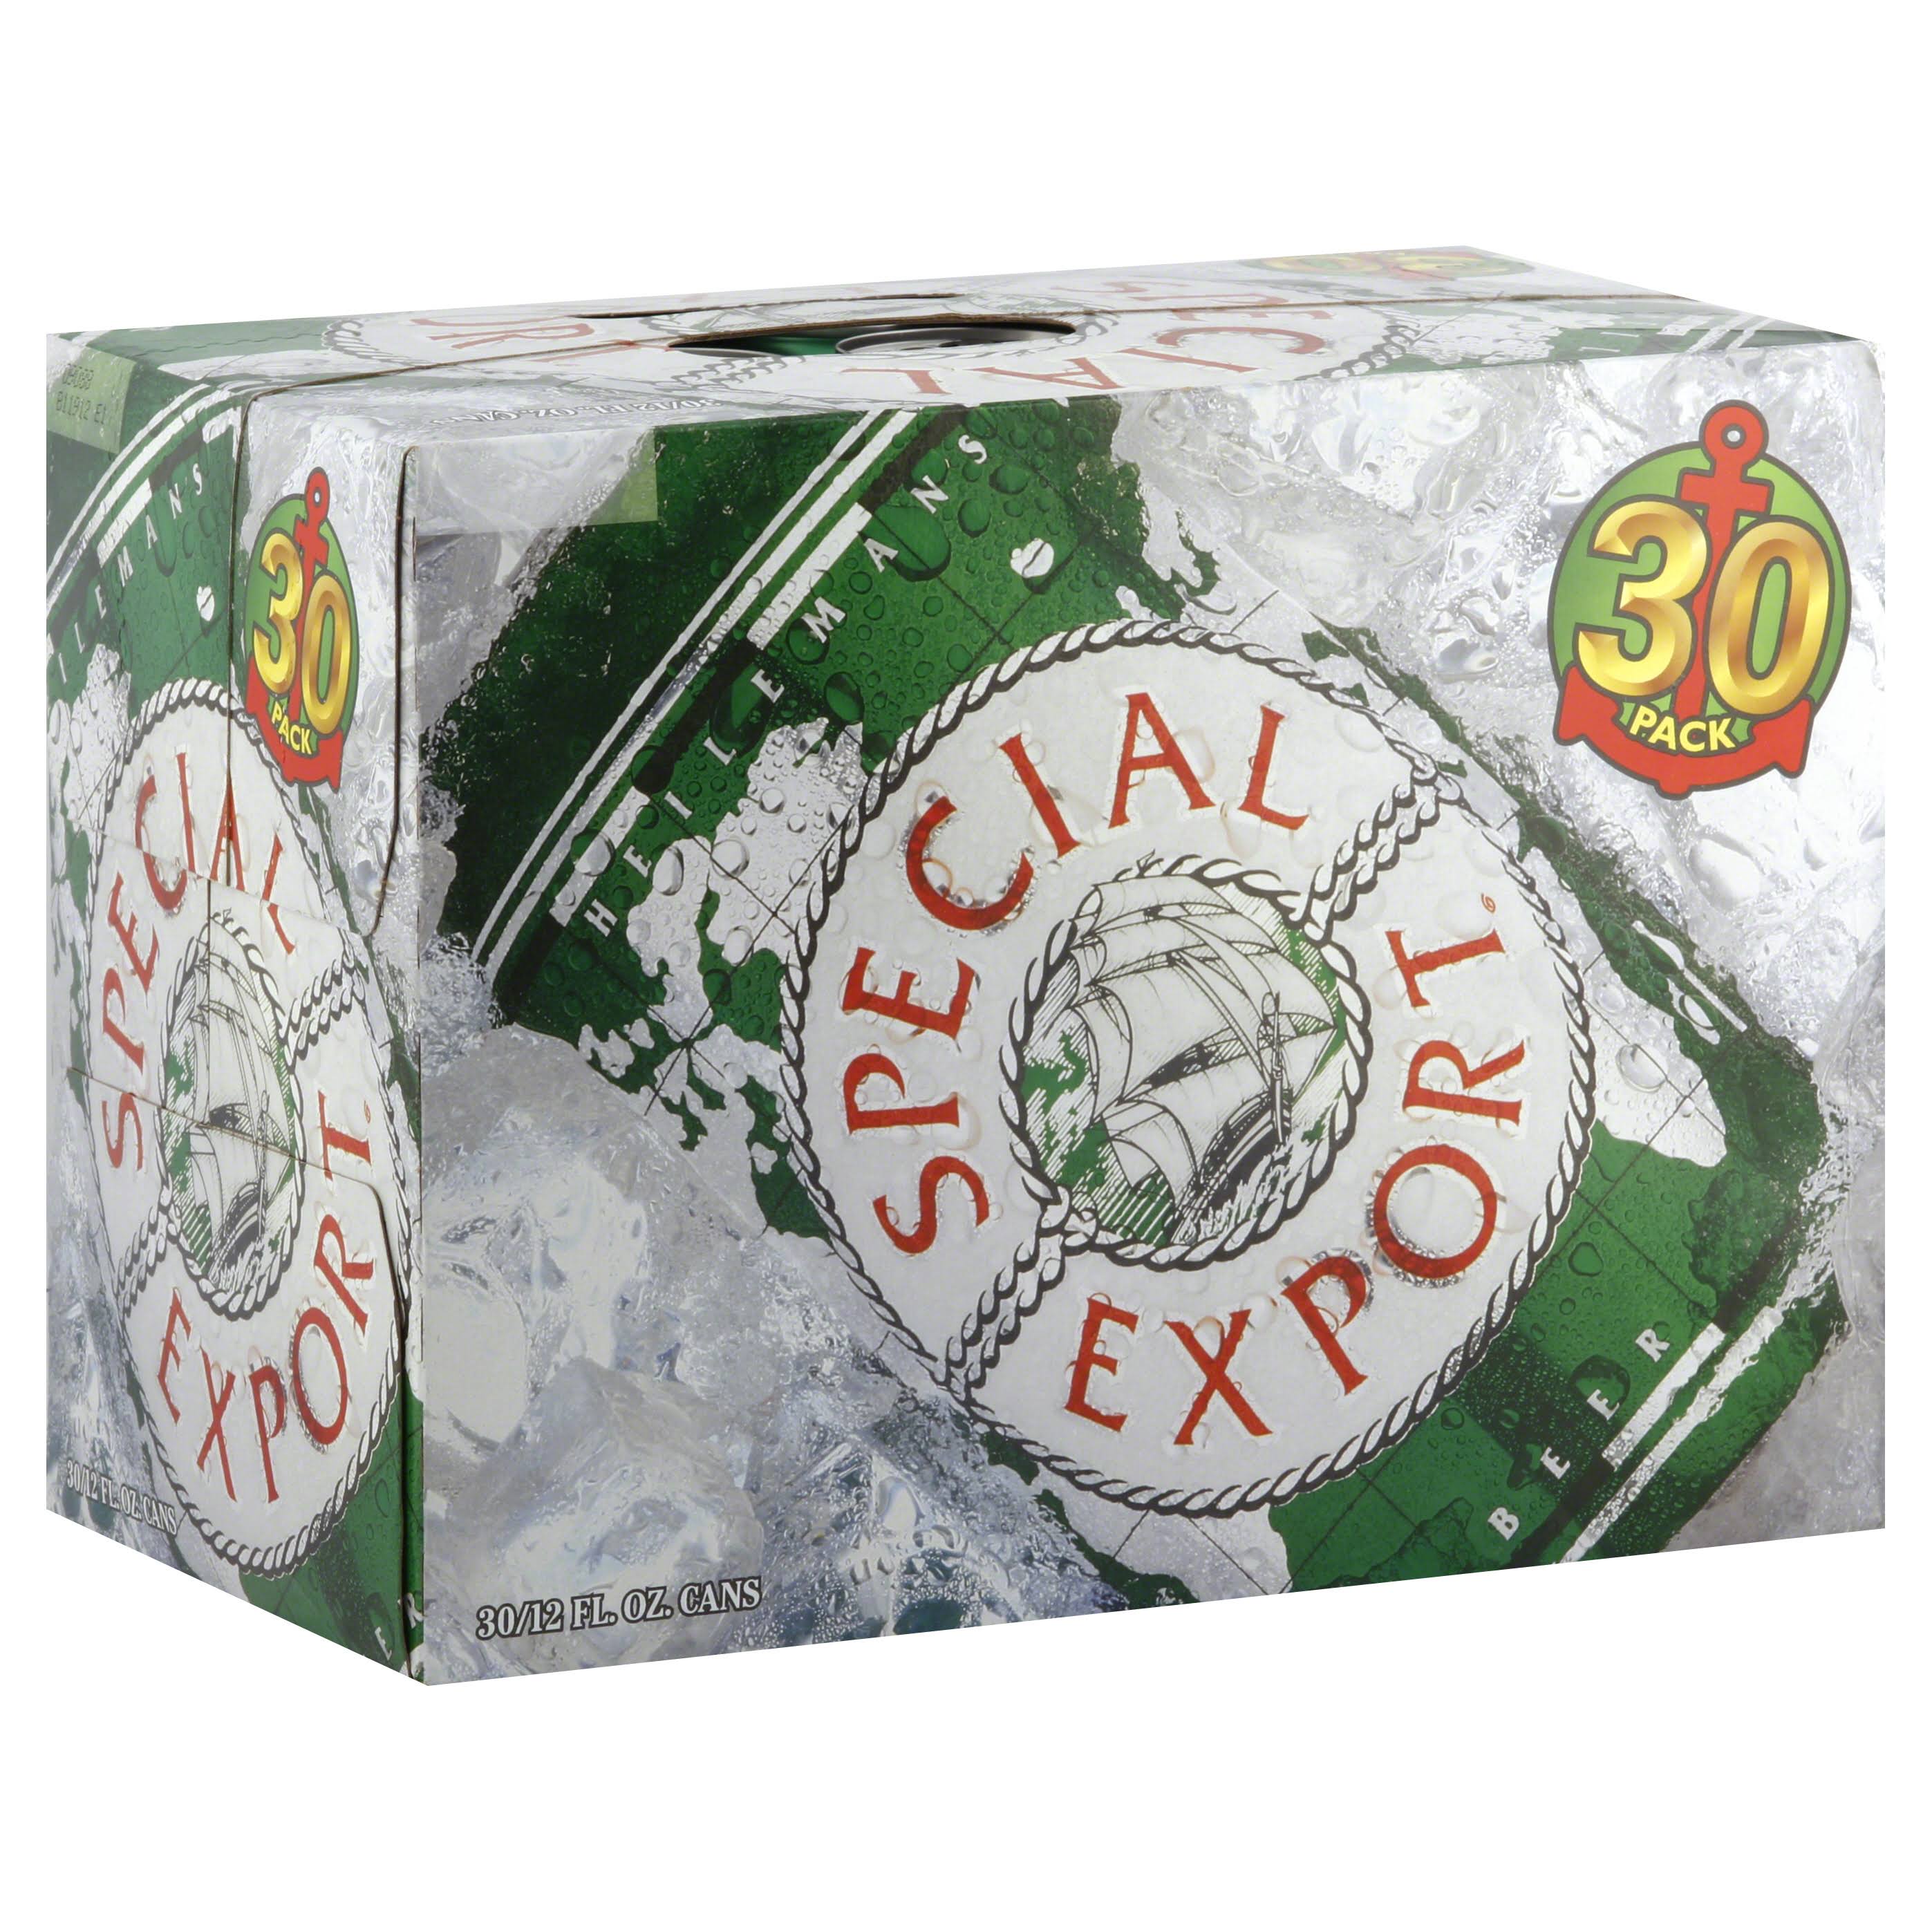 Special Export Beer - 30 pack, 12 fl oz cans